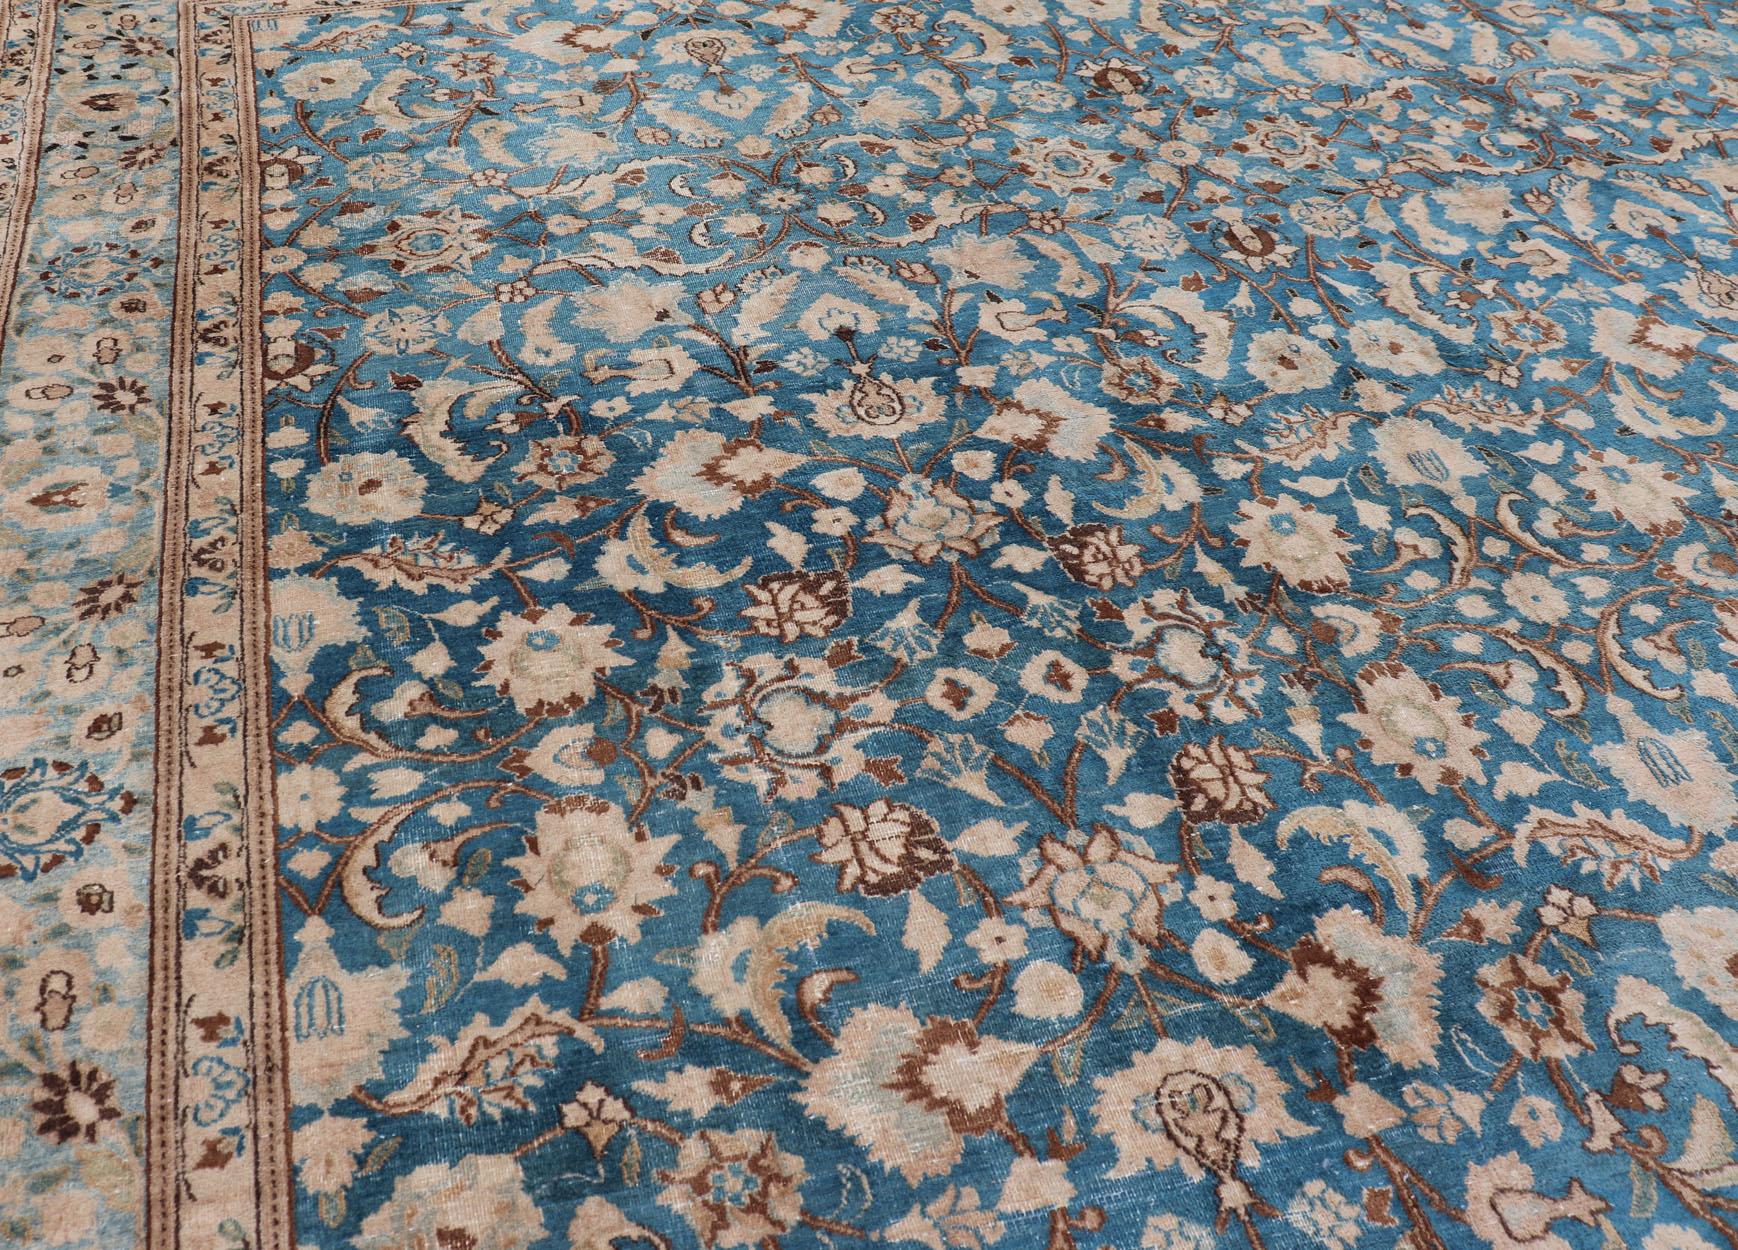 Turquoise Blue Background Antique Persian Khorassan Rug with Light Blue Border 5